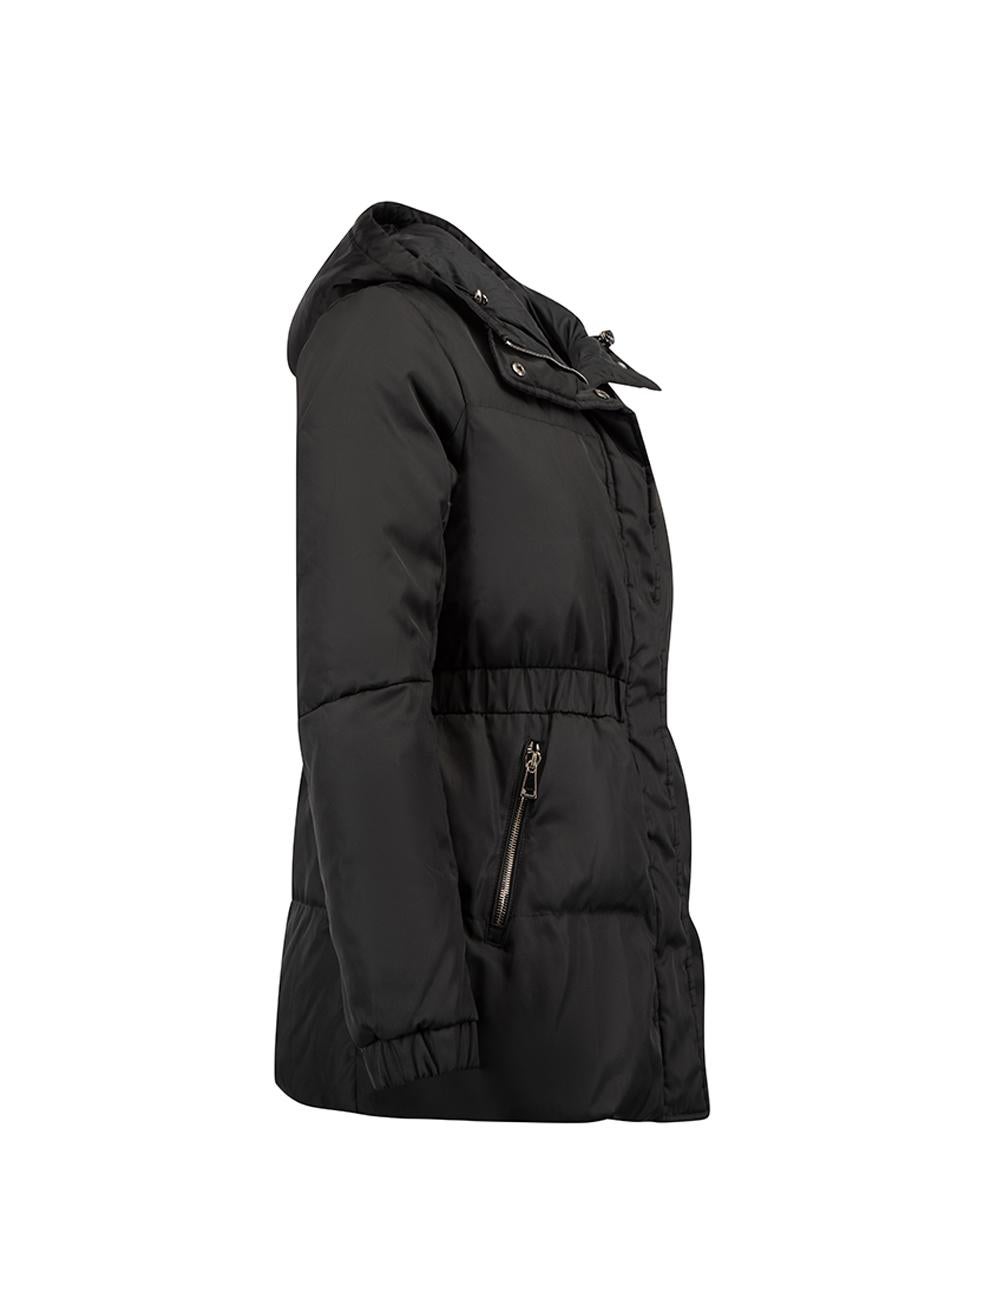 CONDITION is Very good. Minimal wear to coat is evident. Minimal wear to the interior and hood on this used Moncler designer resale item. Details Black Synthetic Down mid length coat Elasticated cuffs and waistline Hooded with drawstring Front zip